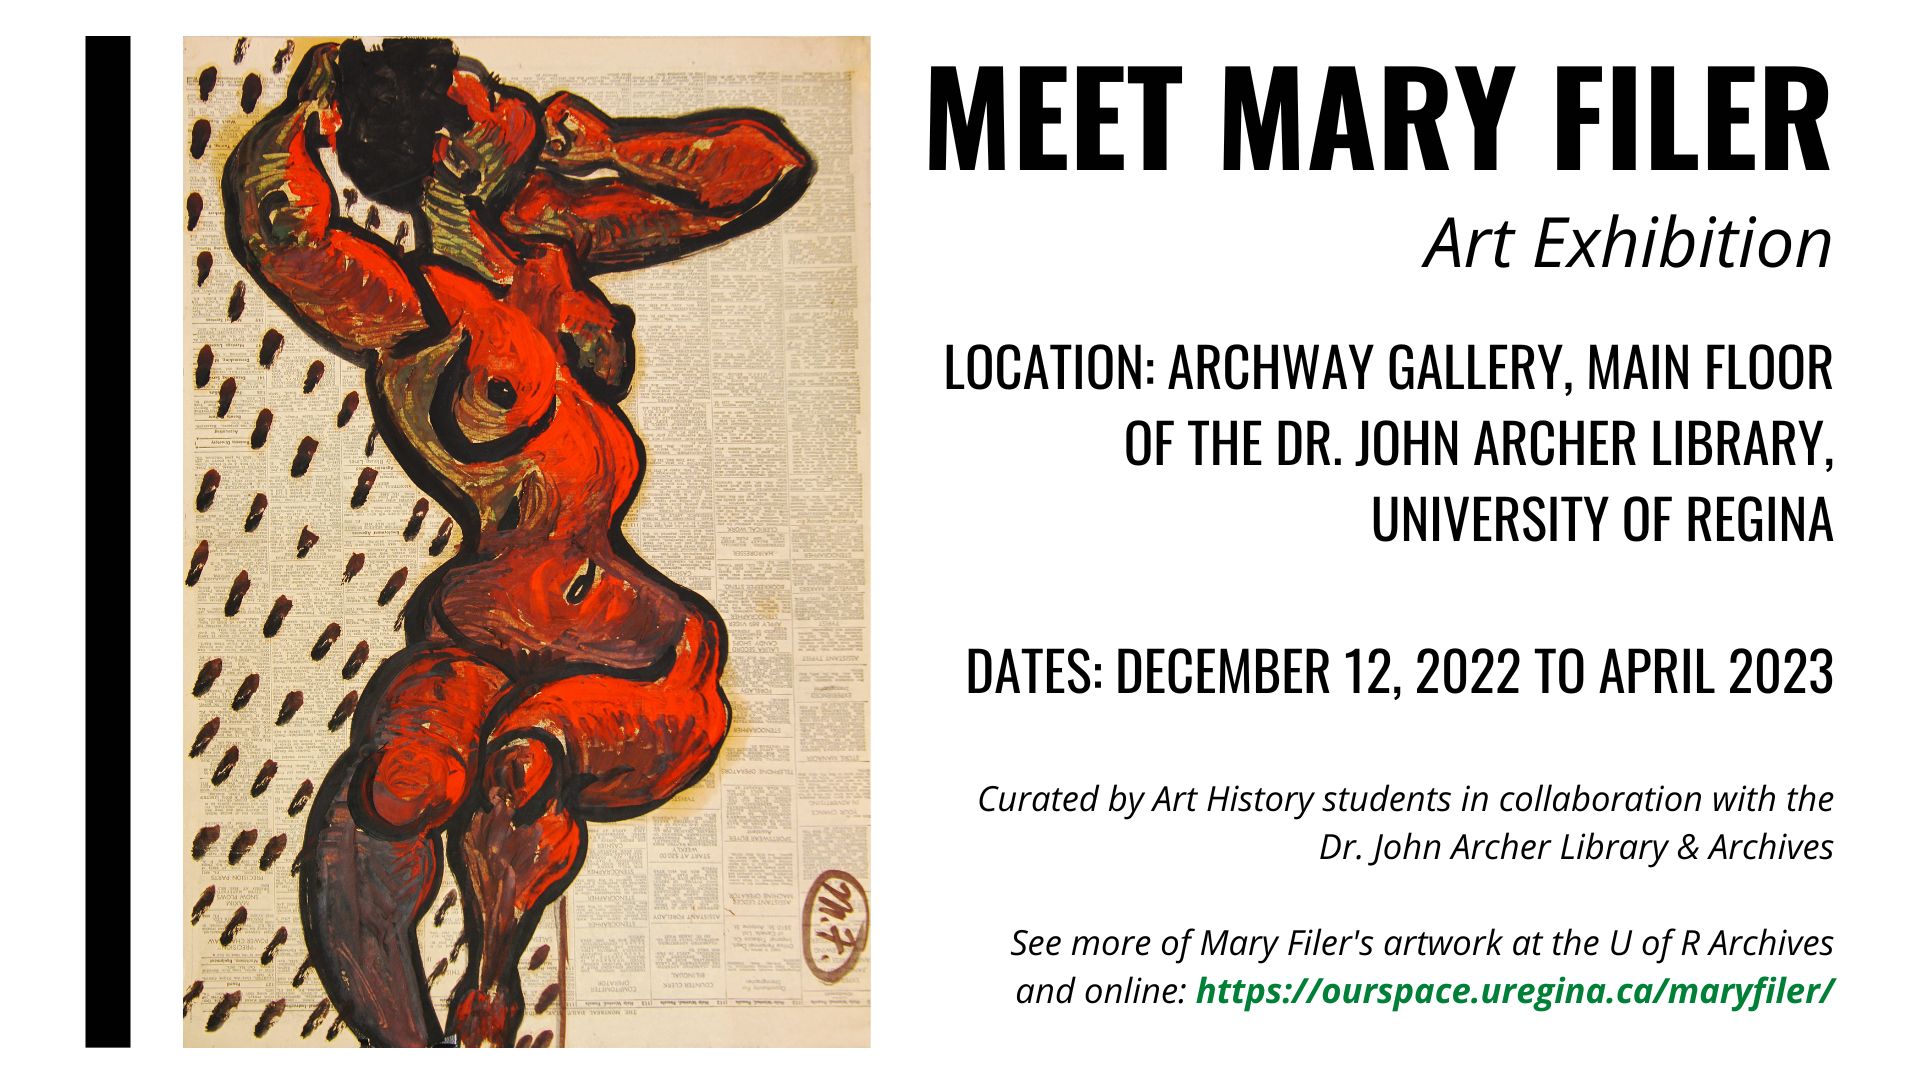 Poster for the Meet Mary Filer art exhibit held at Archer Library from December 2022 to April 2023.